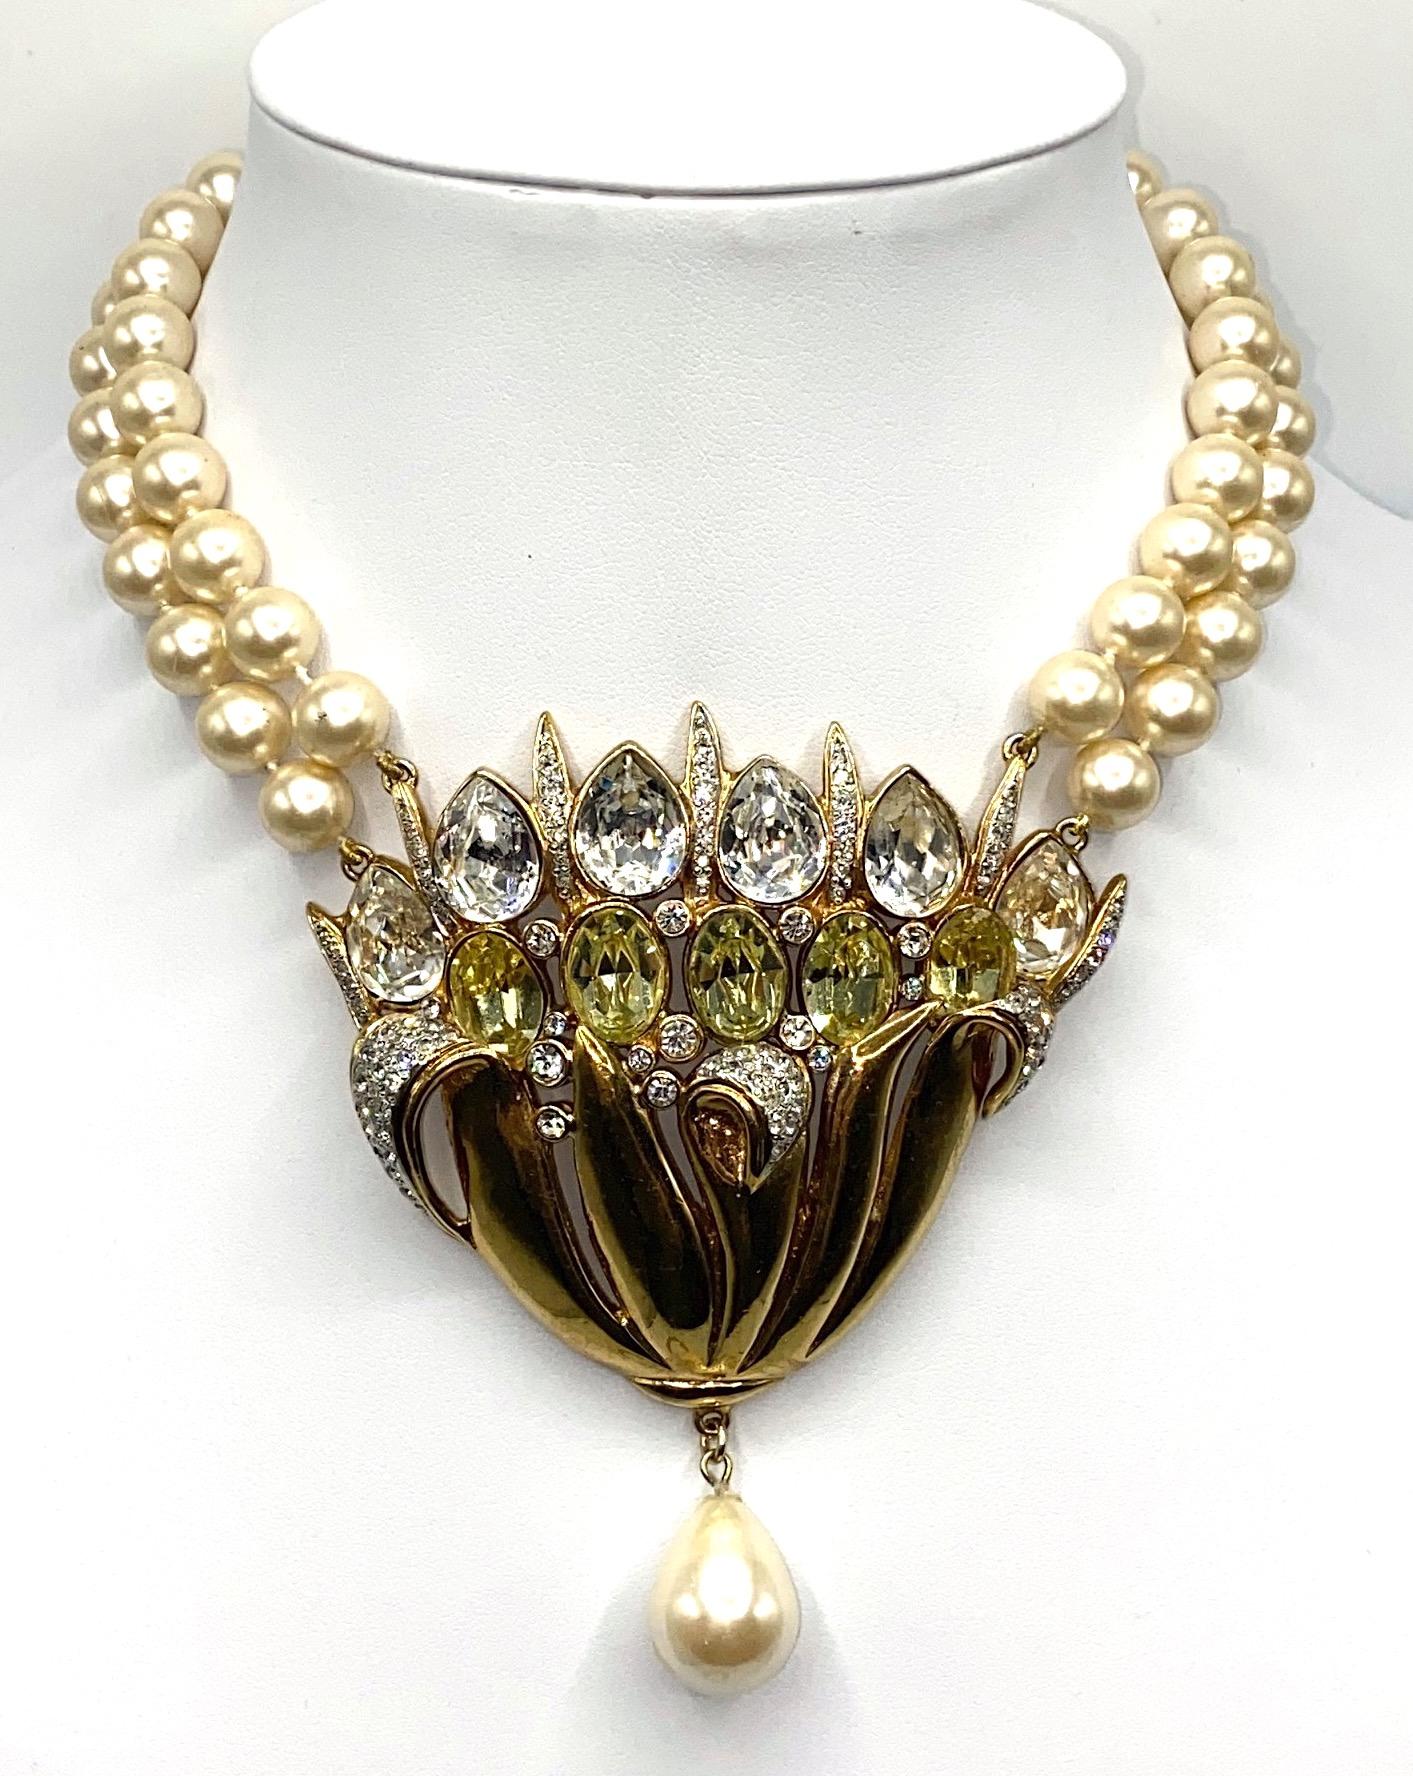 Presented is an exceptional 1980s necklace from the the Italian fashion house of Valentino Garavani. Two stands of individually knotted faux glass pearls support the large statement center piece of a flower. The center piece is lightly domed and